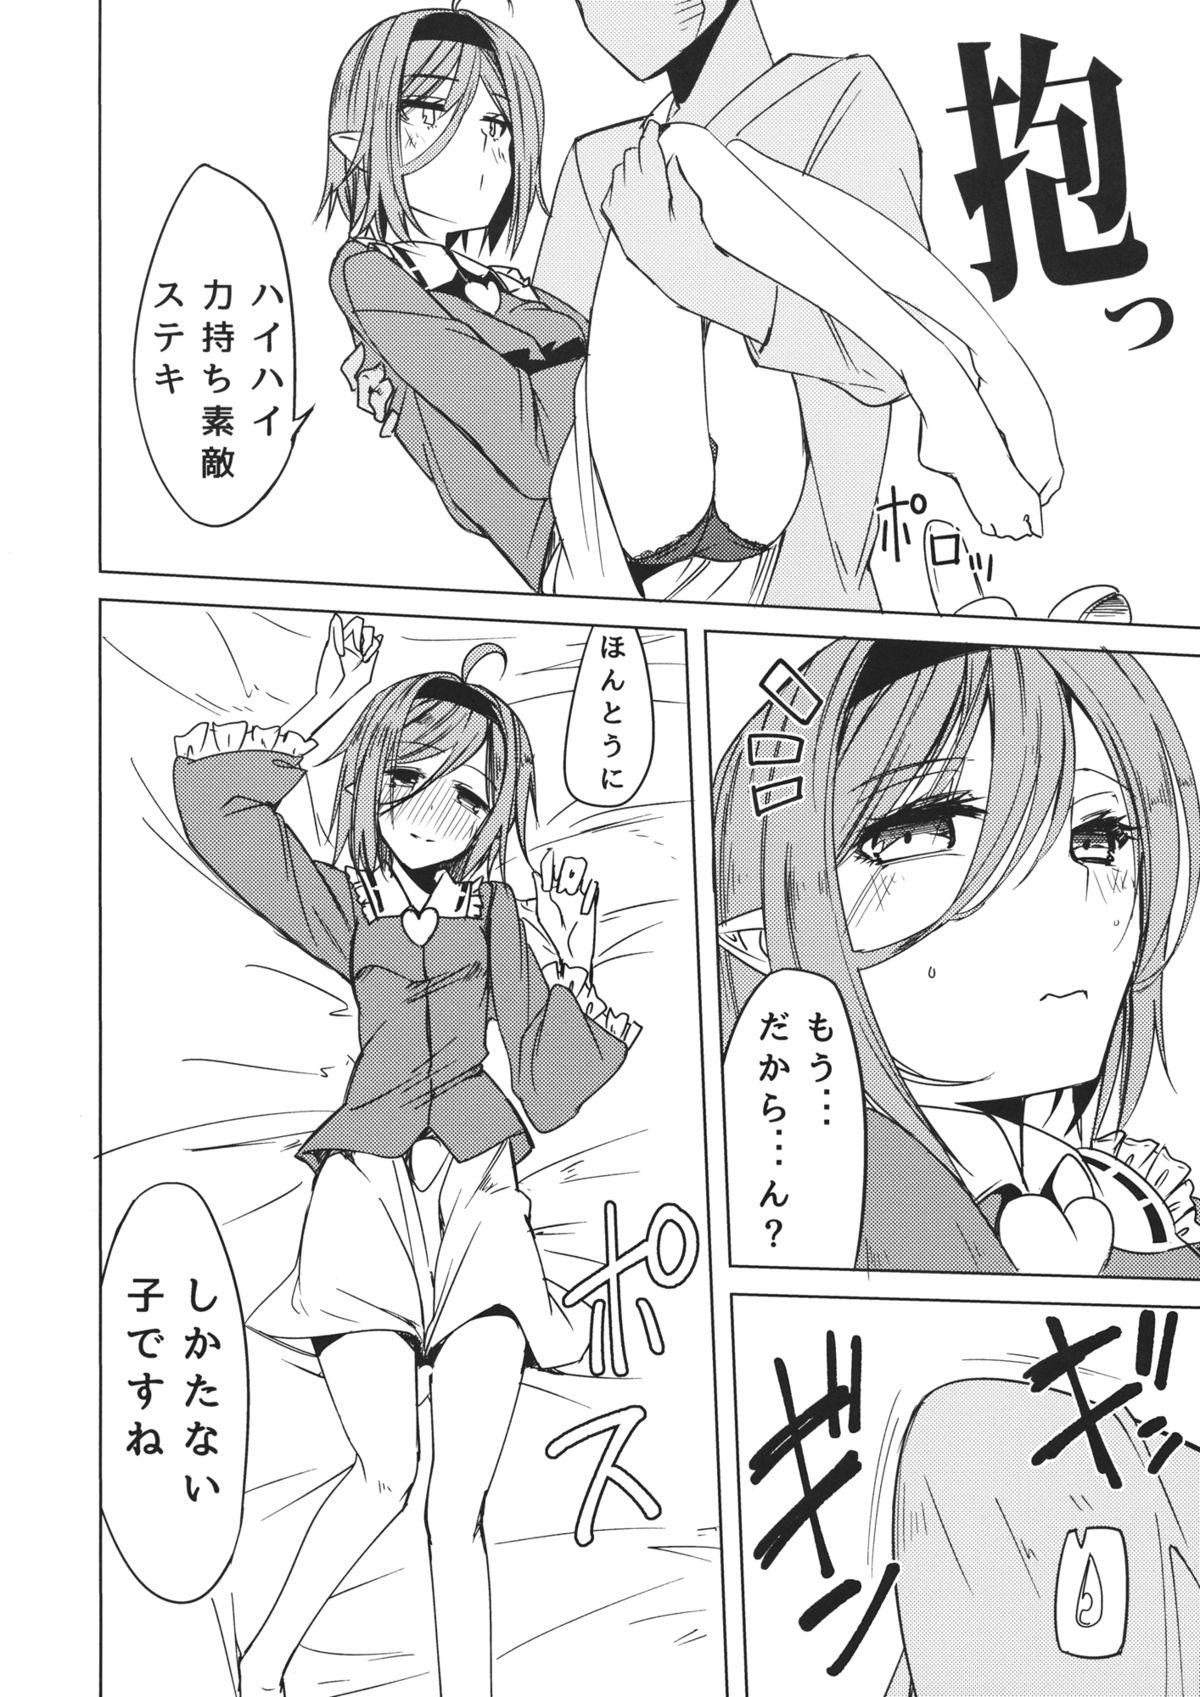 Lolicon Satori-san to - Touhou project Real Amatuer Porn - Page 3